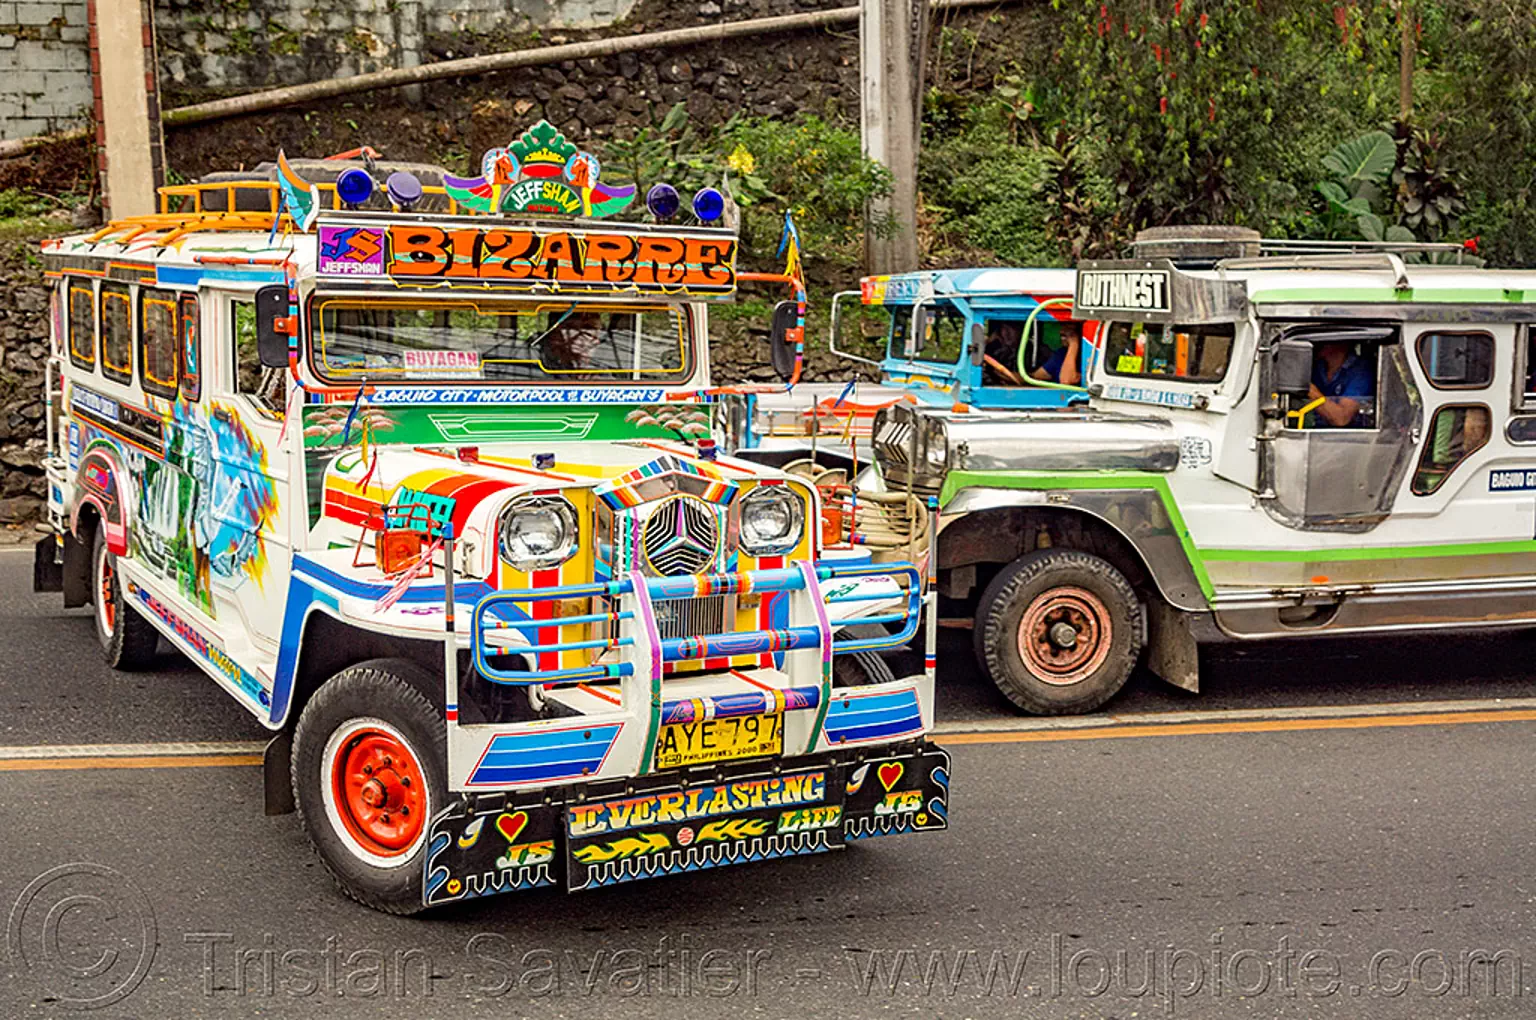 jeepney doing U-turn (philippines), baguio, colorful, decorated, jeepney, painted, philippines, road, truck